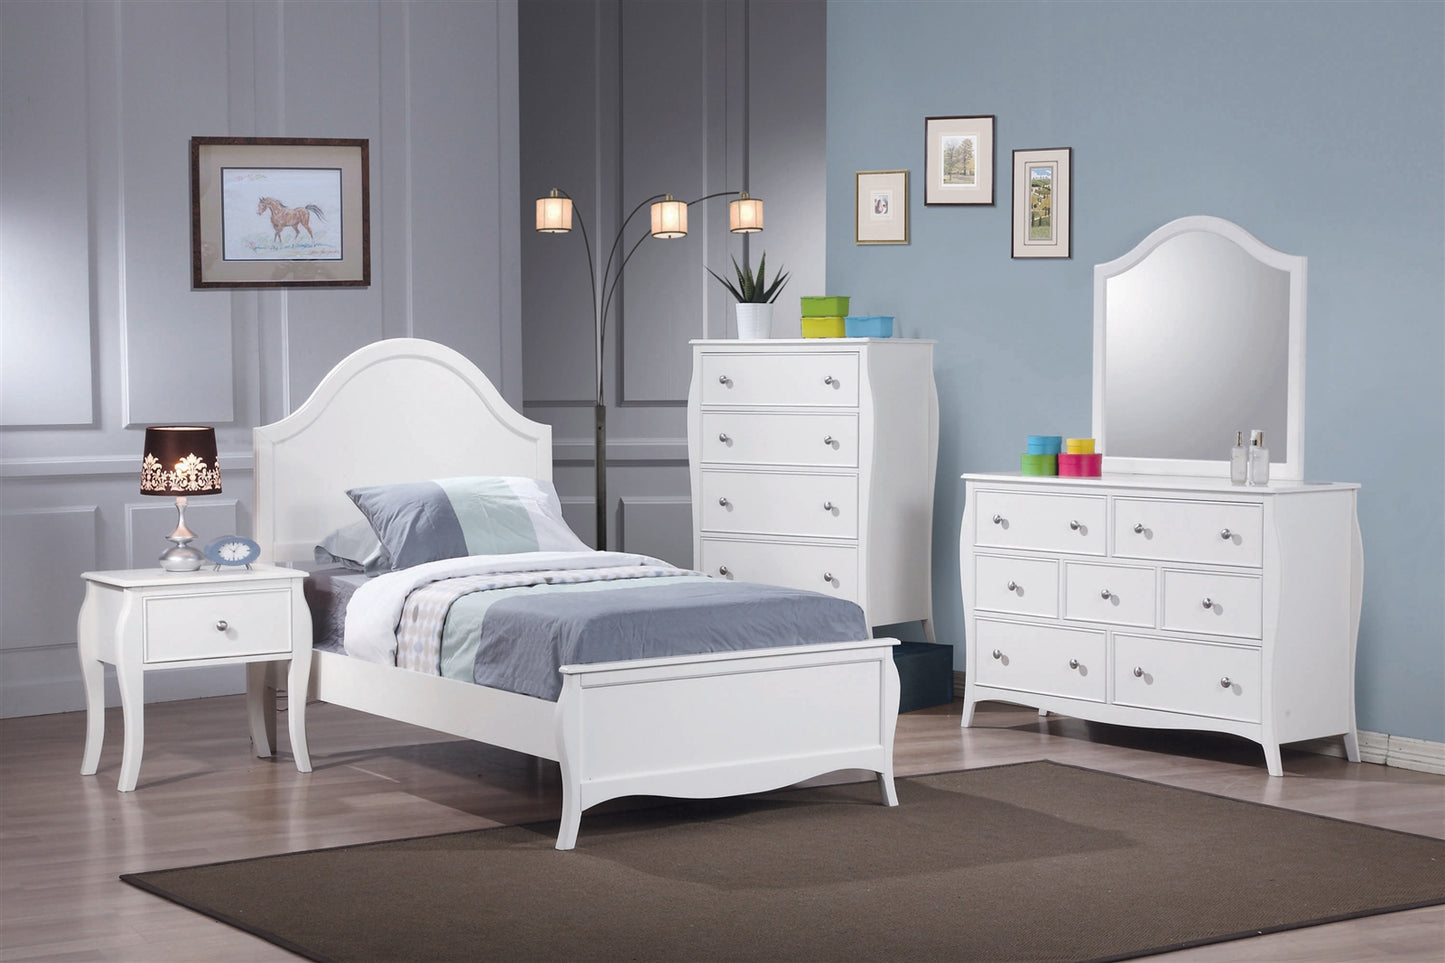 Molly Fairytale Twin Bedroom Collection